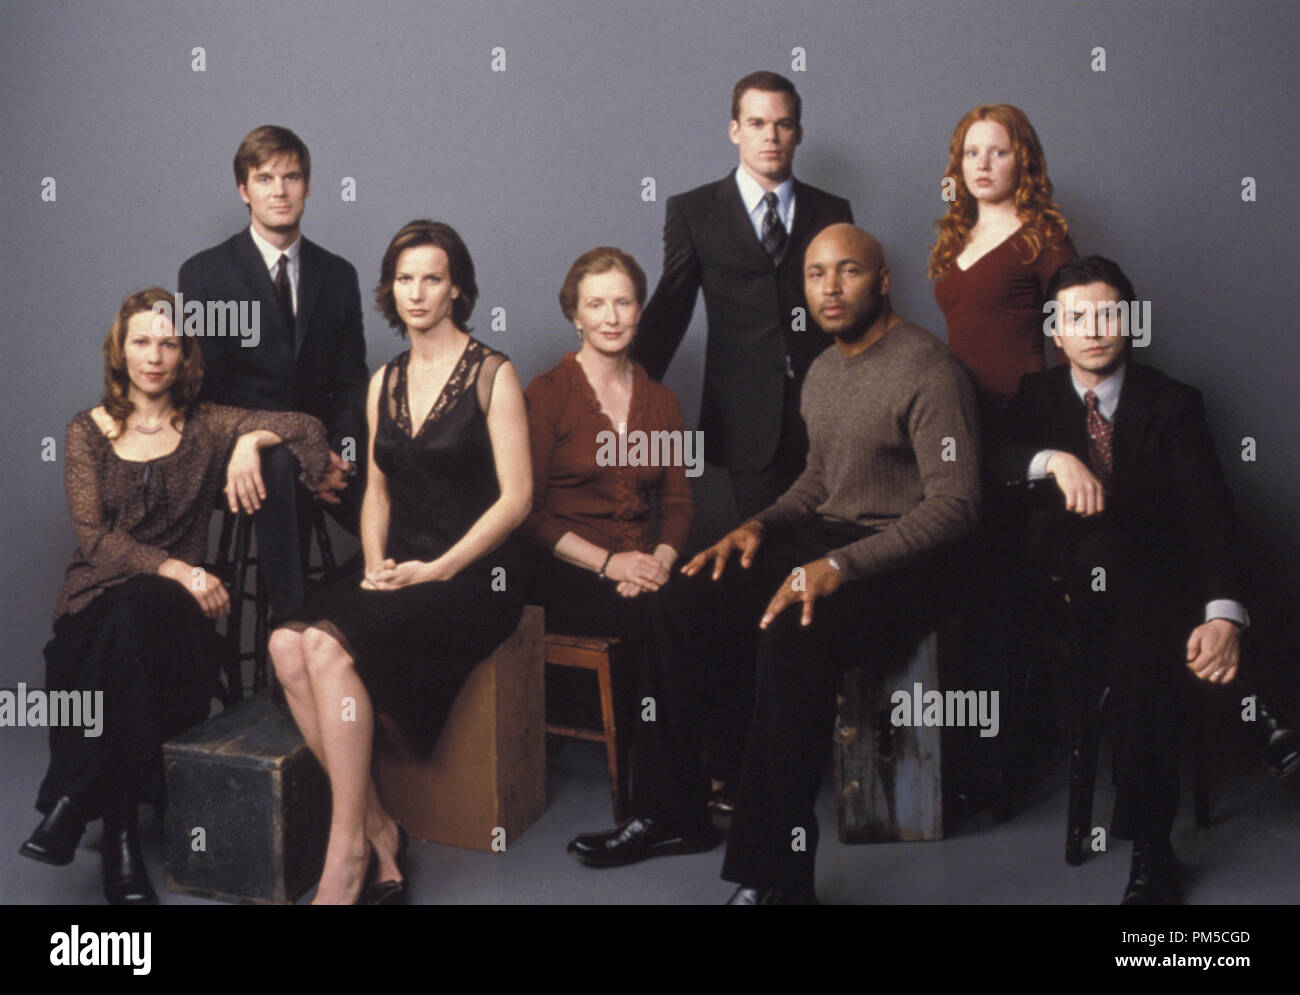 Film Still / Publicity Still from 'Six Feet Under' Lili Taylor, Peter Krause, Rachel Griffiths, Frances Conroy, Michael C. Hall, Mathew St. Patrick, Lauren Ambrose, Freddy Rodriguez © 2003 HBO Photo Credit: Art Streiber  File Reference # 30753056THA  For Editorial Use Only -  All Rights Reserved Stock Photo